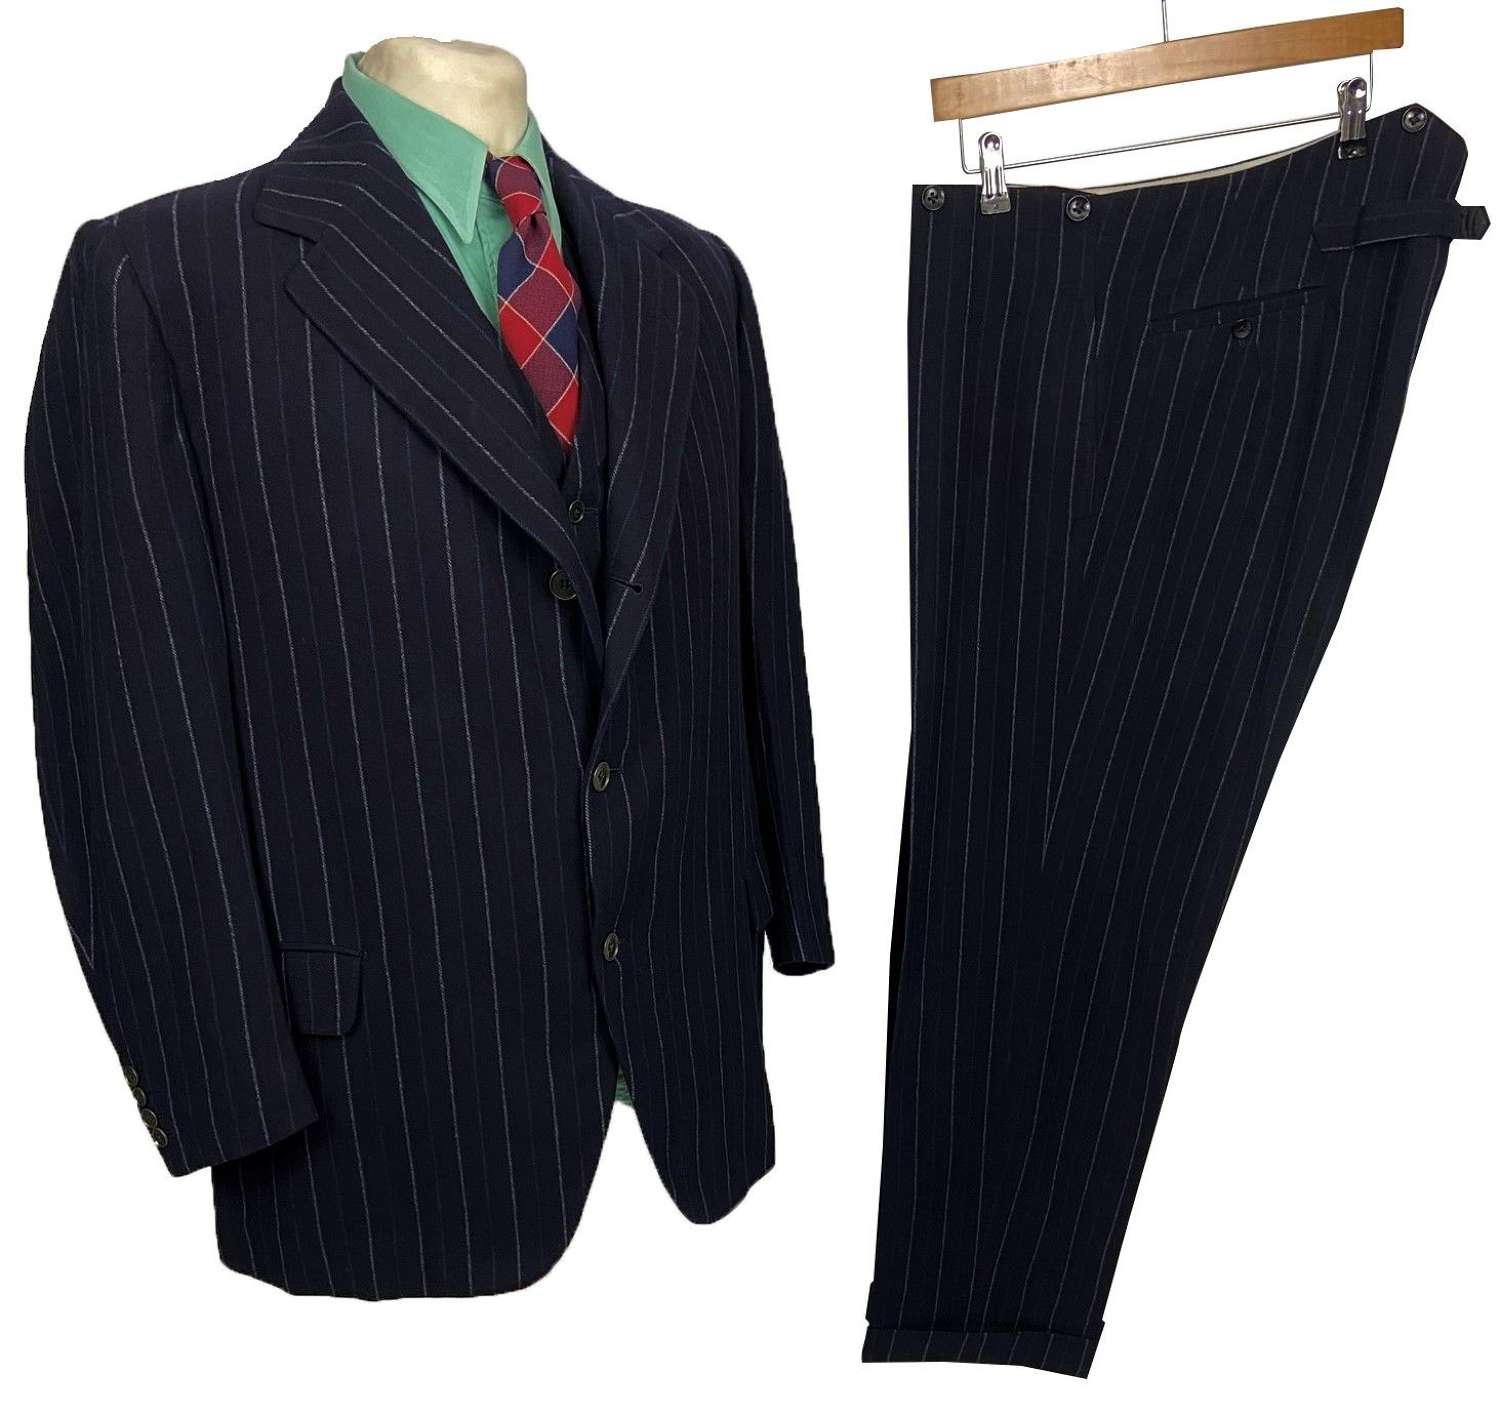 Incredible 1939 Dated British Bespoke Three Piece Suit - Lord Hesketh